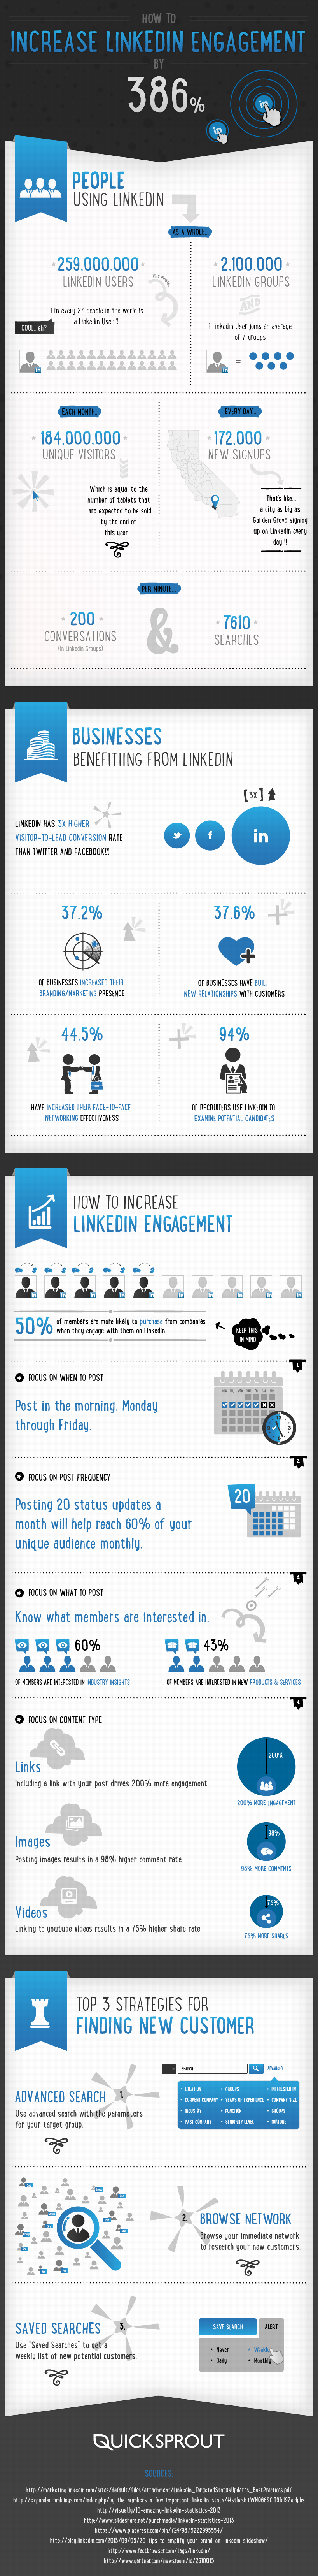 How to Increase LinkedIn Engagement by 386%